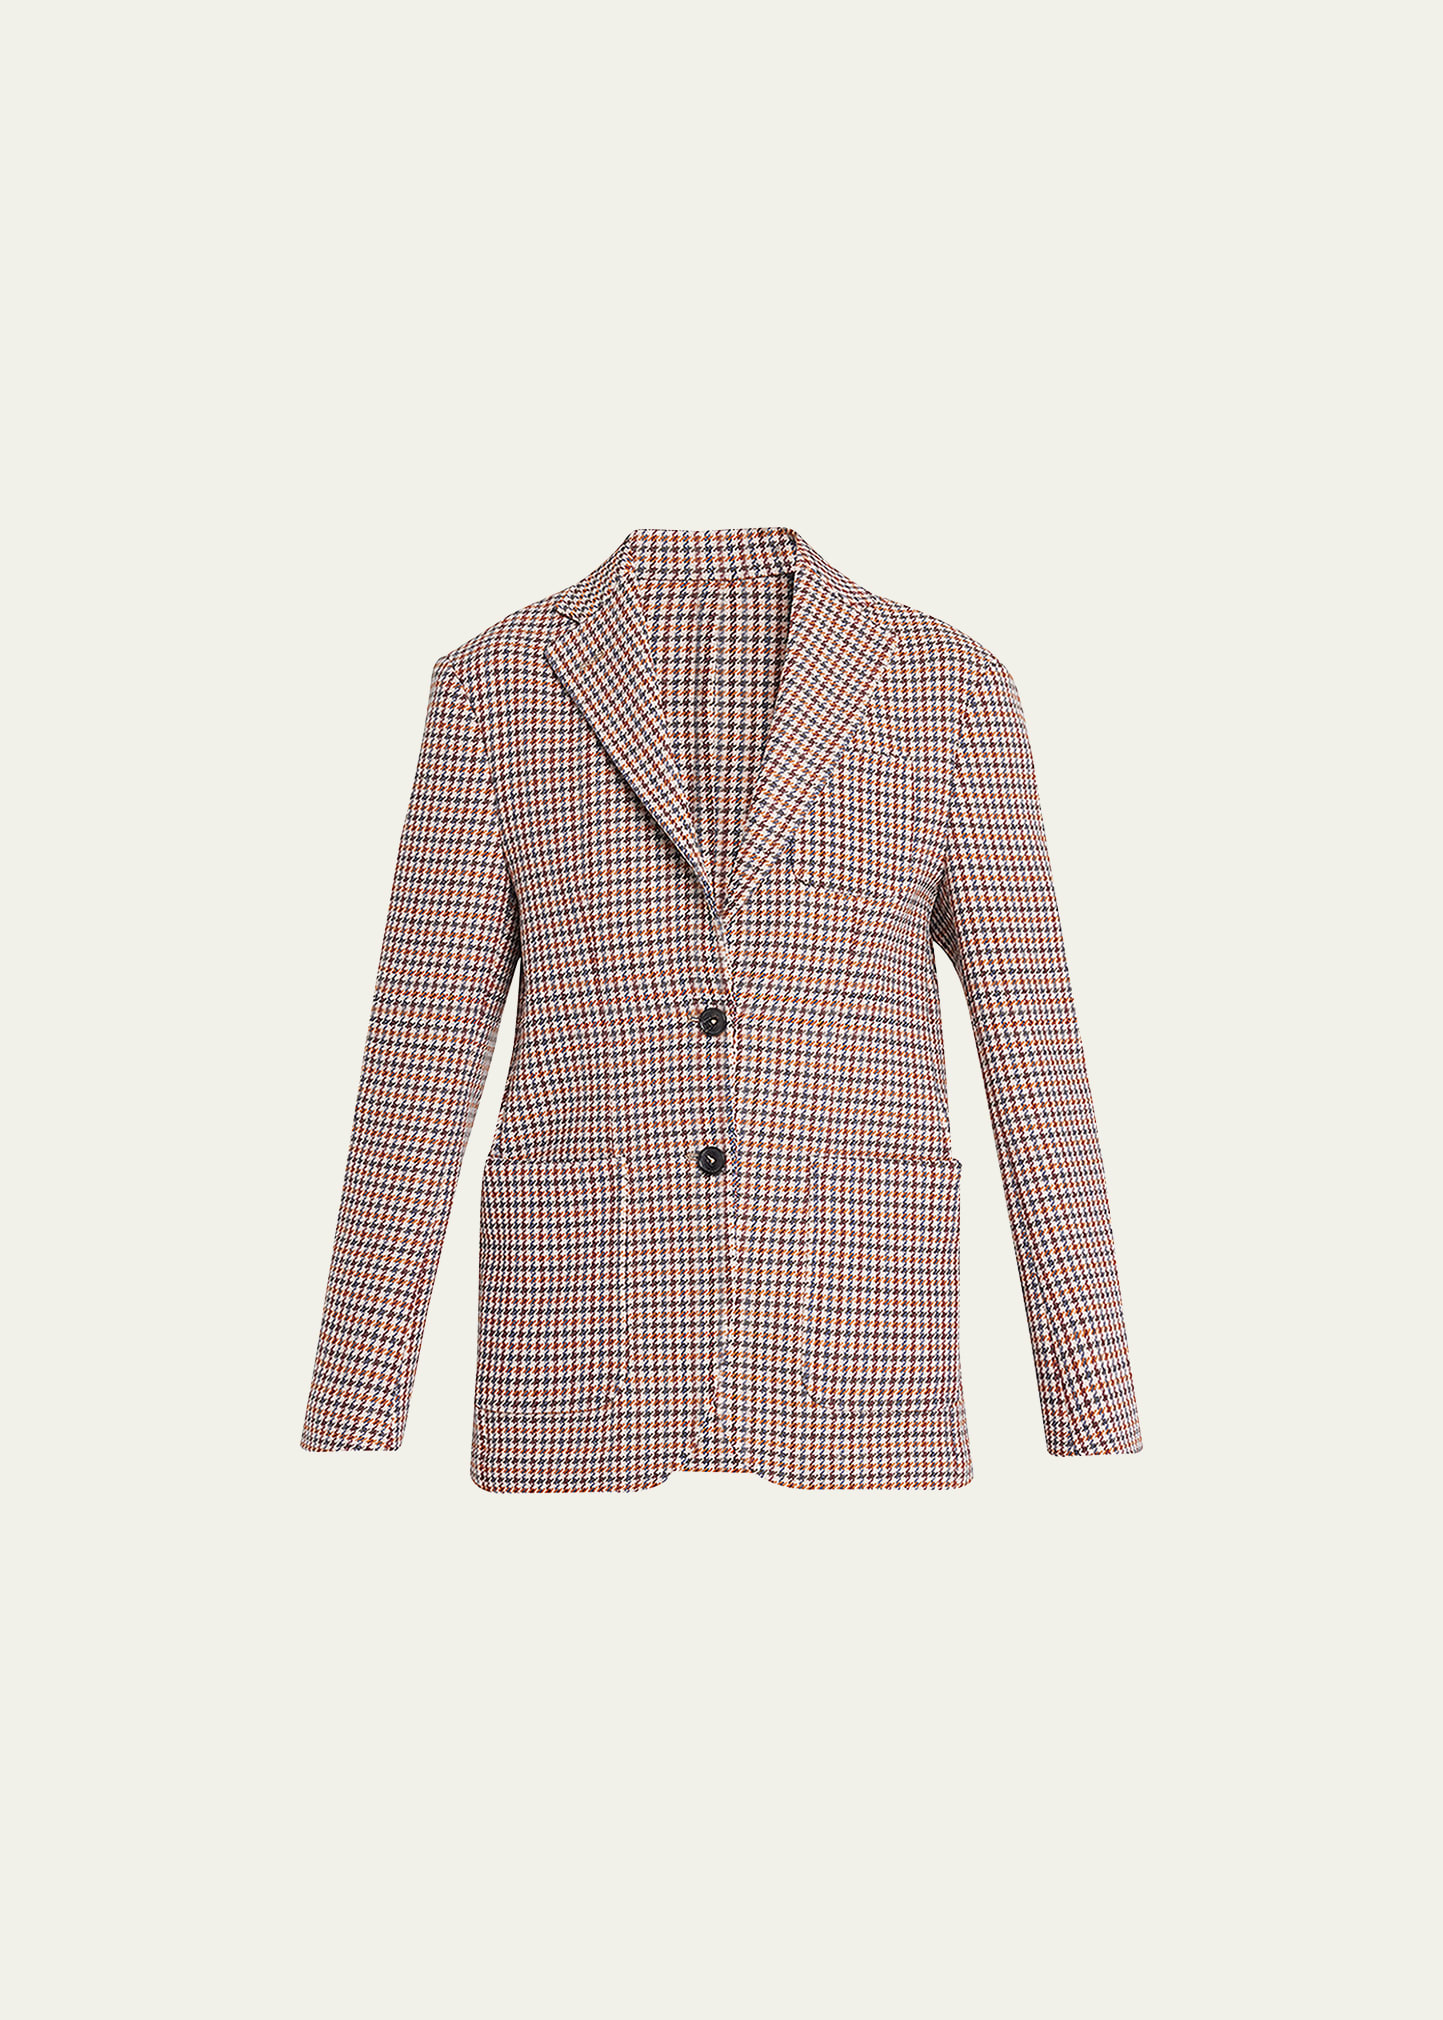 Houndstooth Single-Breasted Wool Jacket